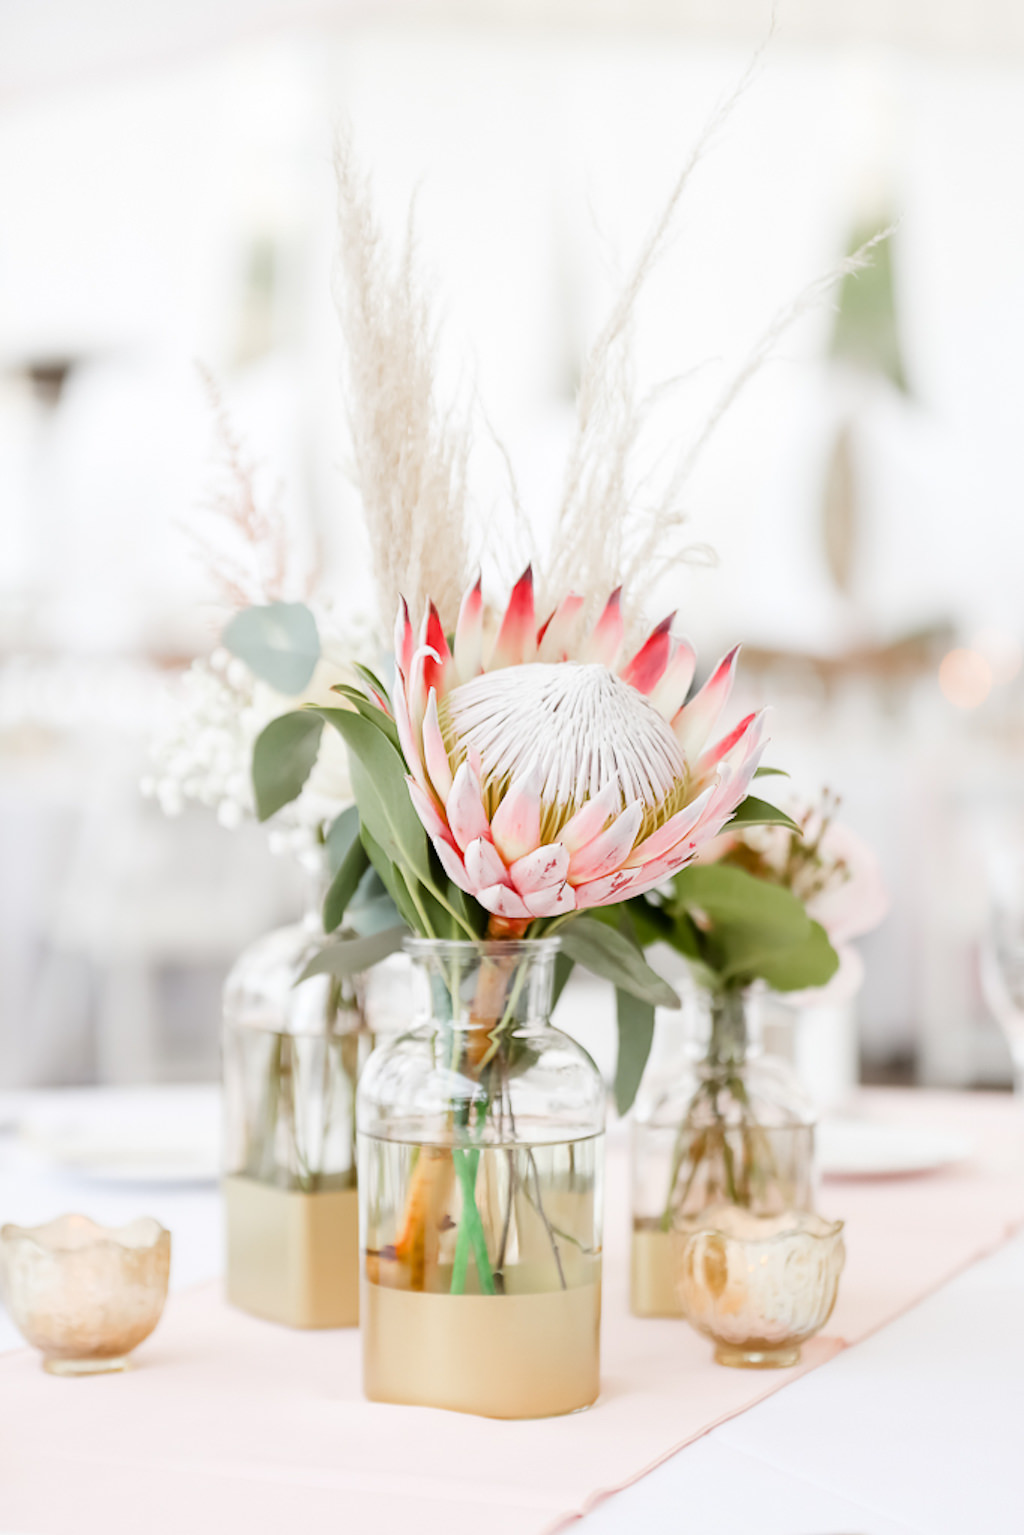 Tropical Inspired Wedding Reception Decor, Pink King Protea in Clear Glass and Gold Vase, Low Floral Centerpiece | Photographer Lifelong Photography Studios